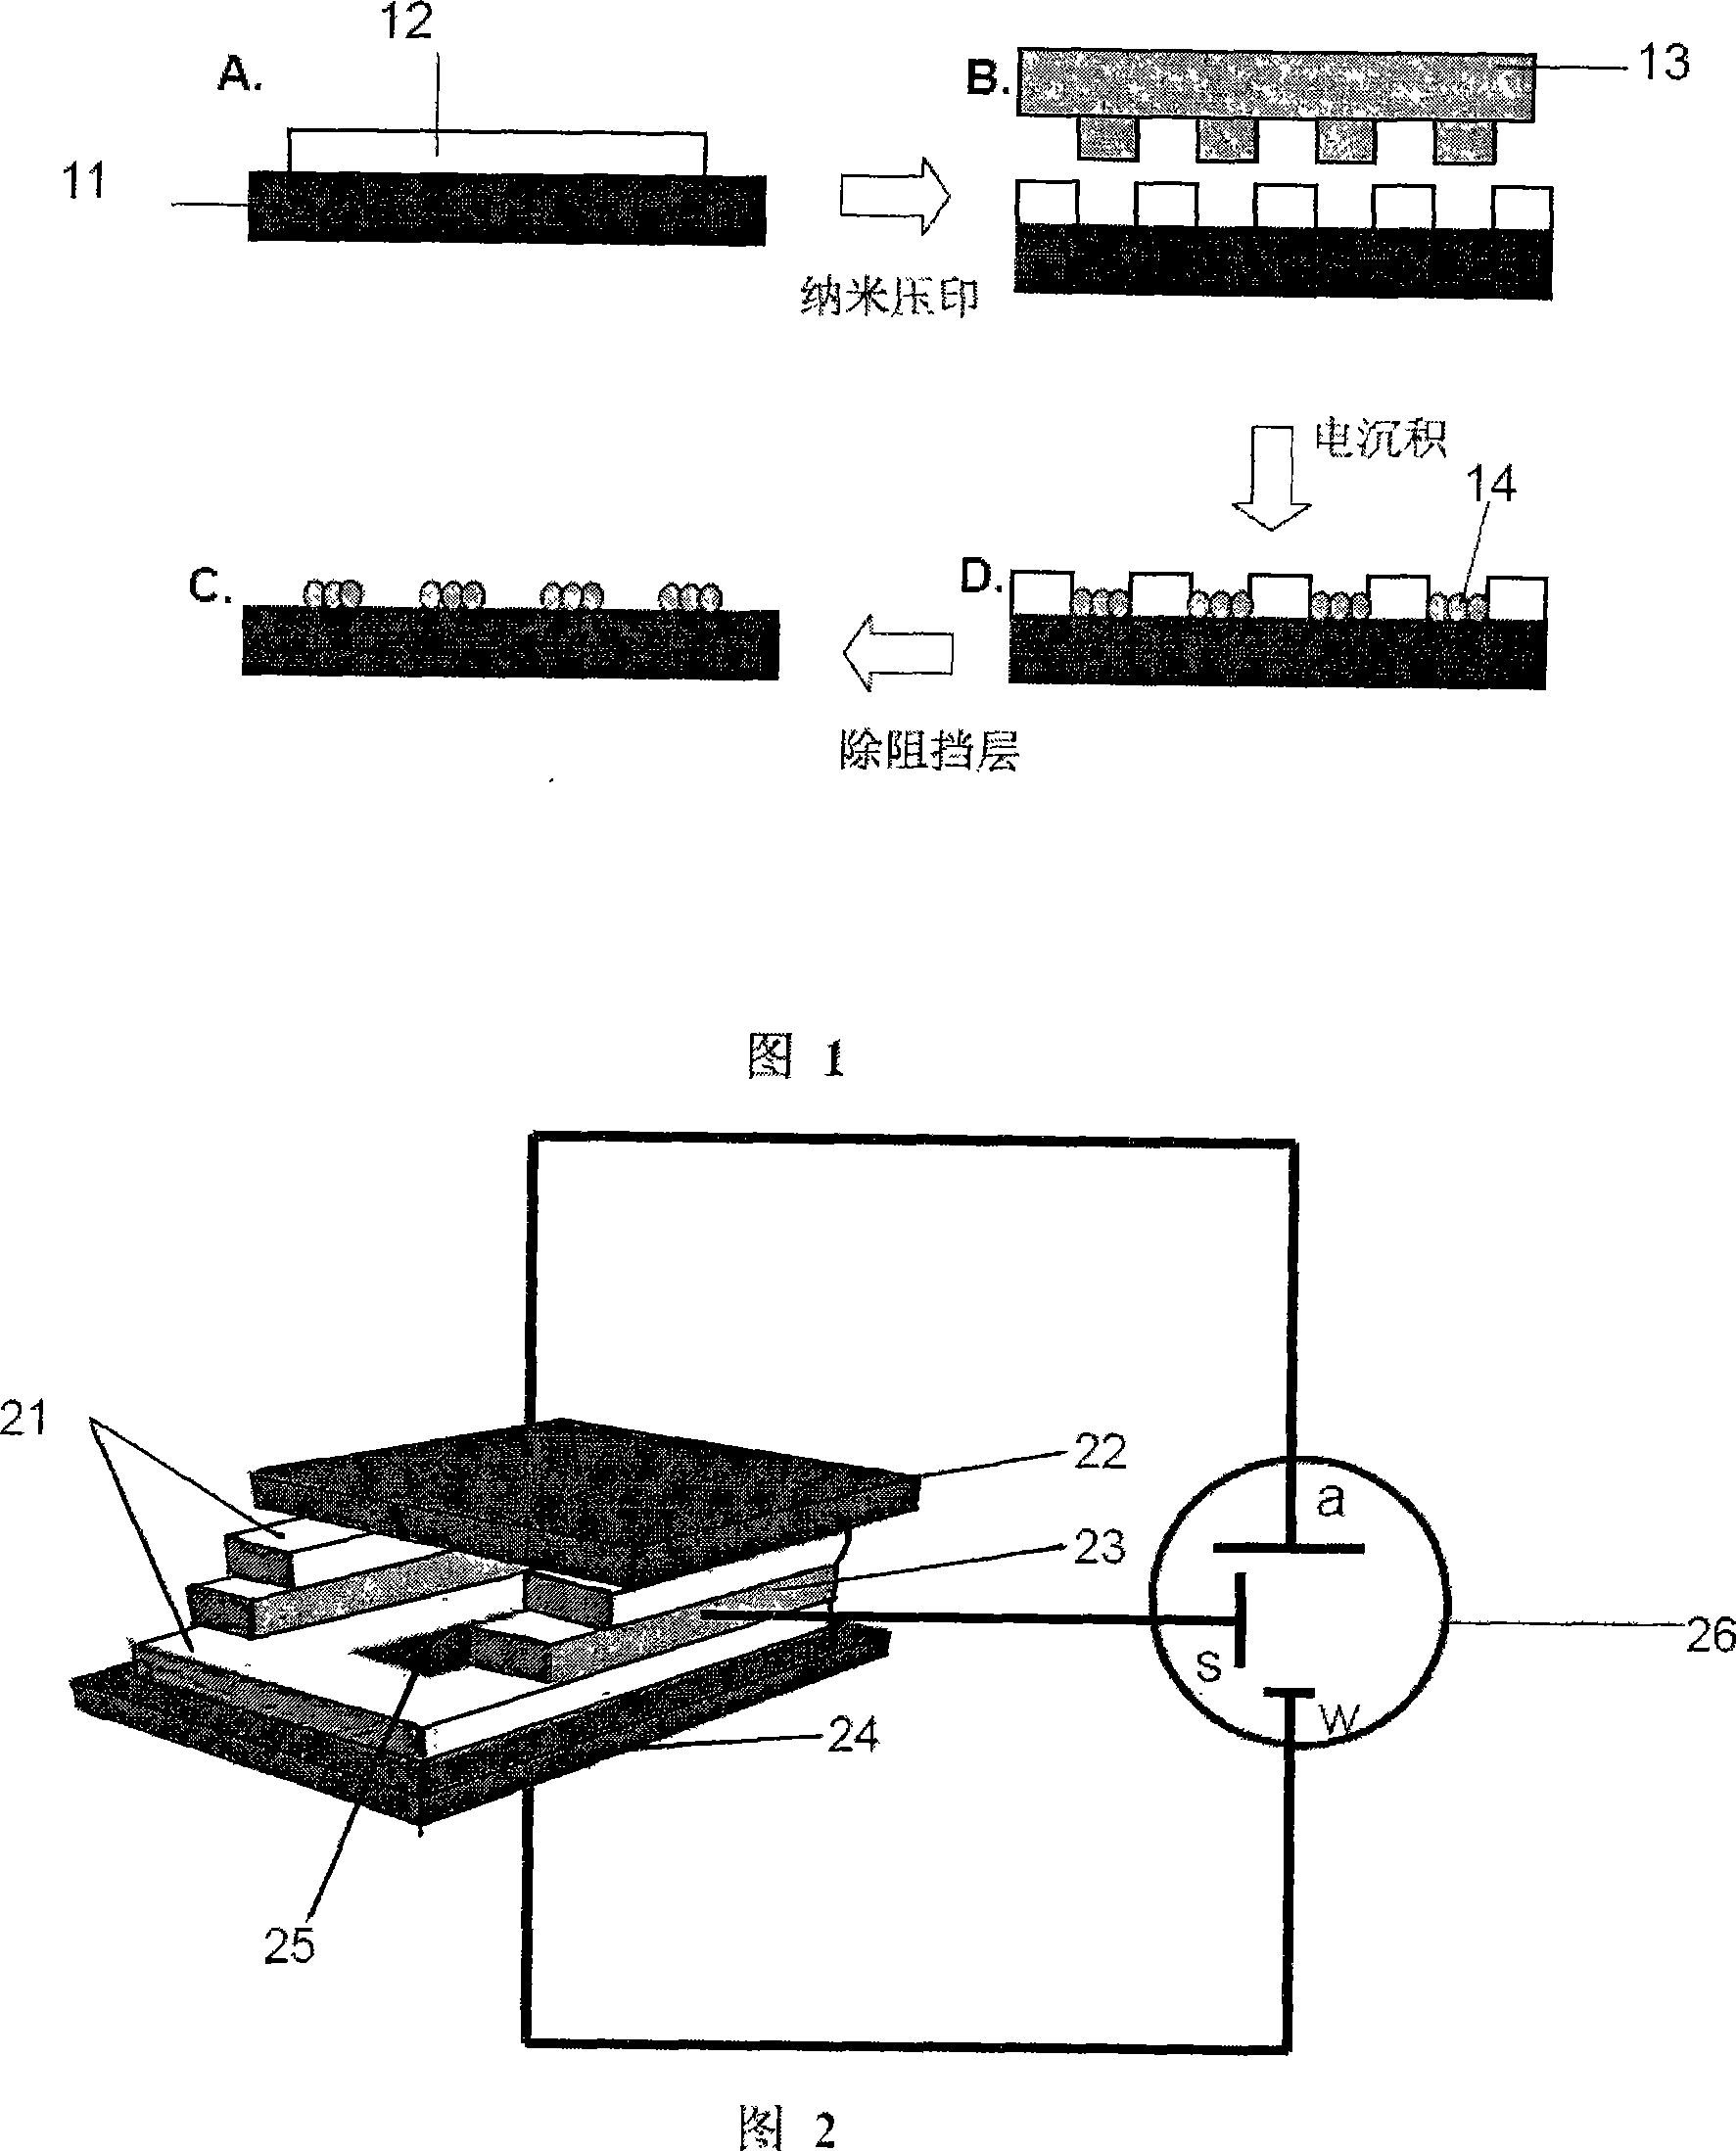 Constituting method for metal ordered structure surface reinforced base